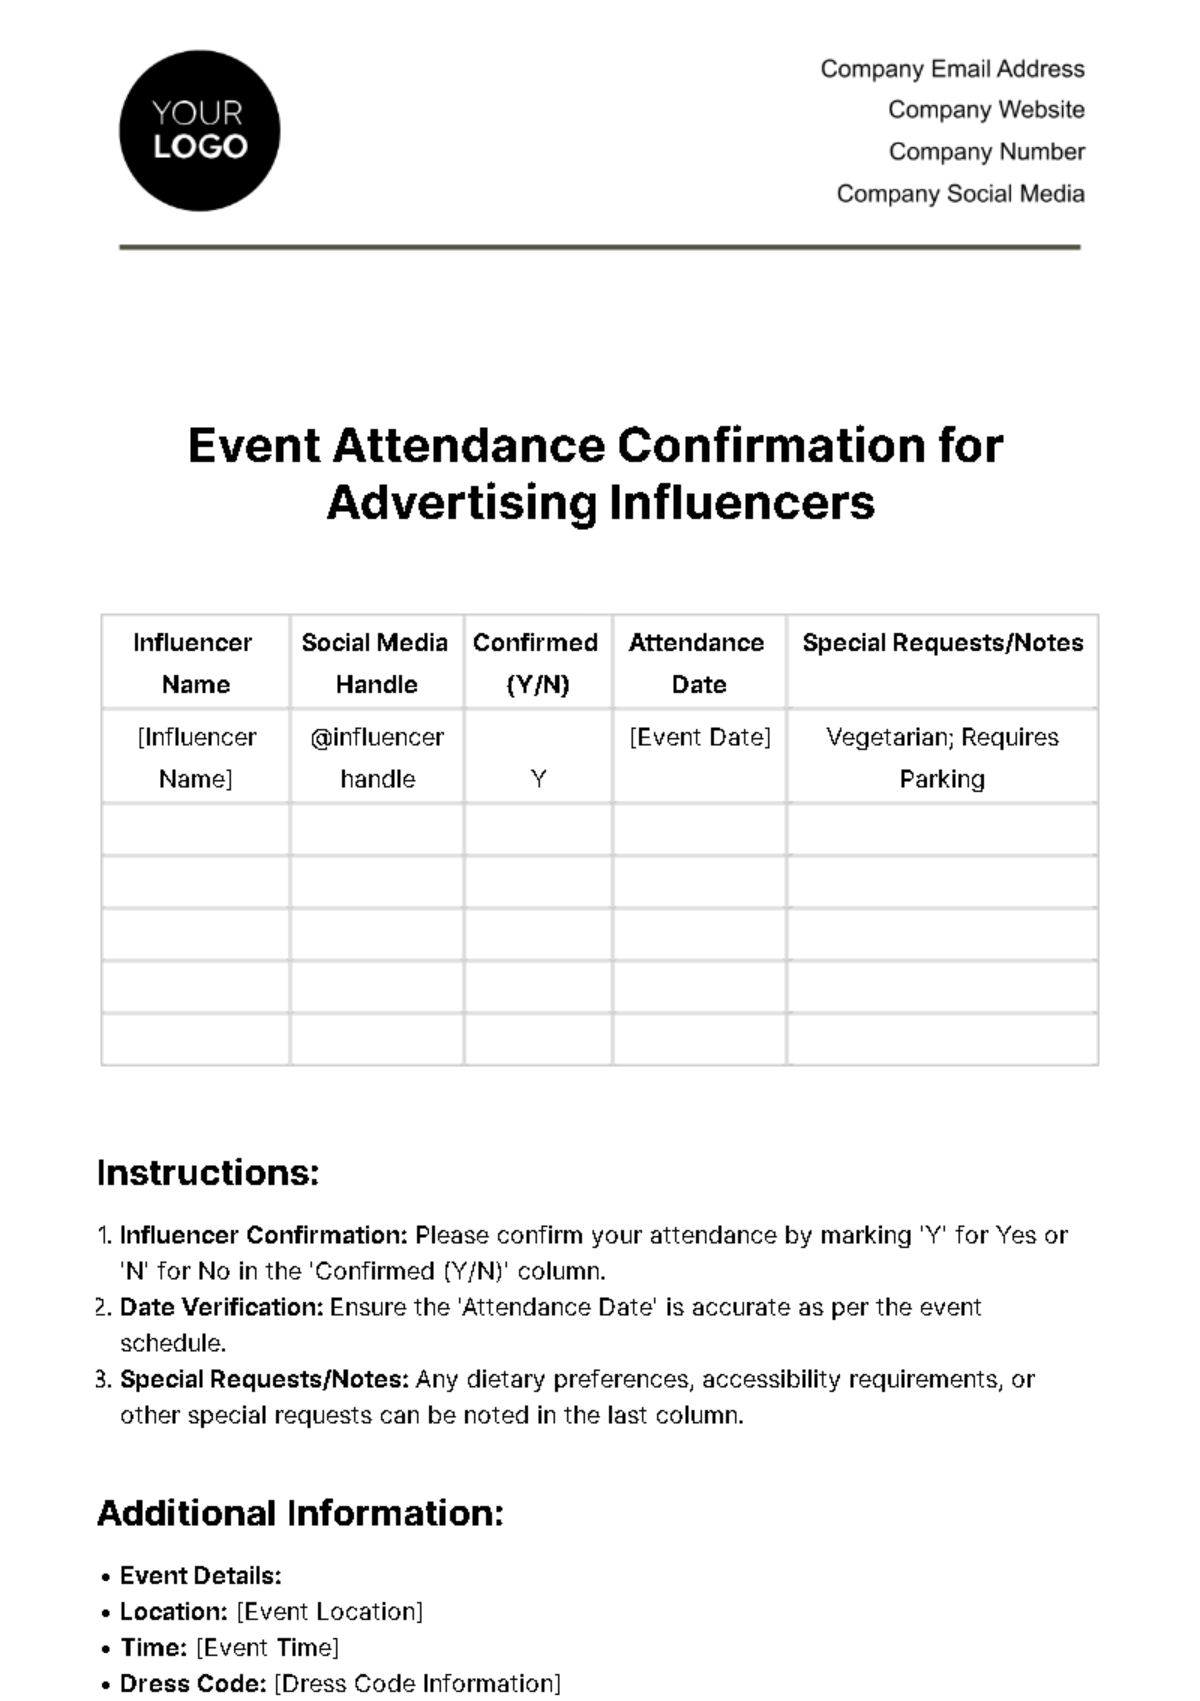 Event Attendance Confirmation for Advertising Influencers Template